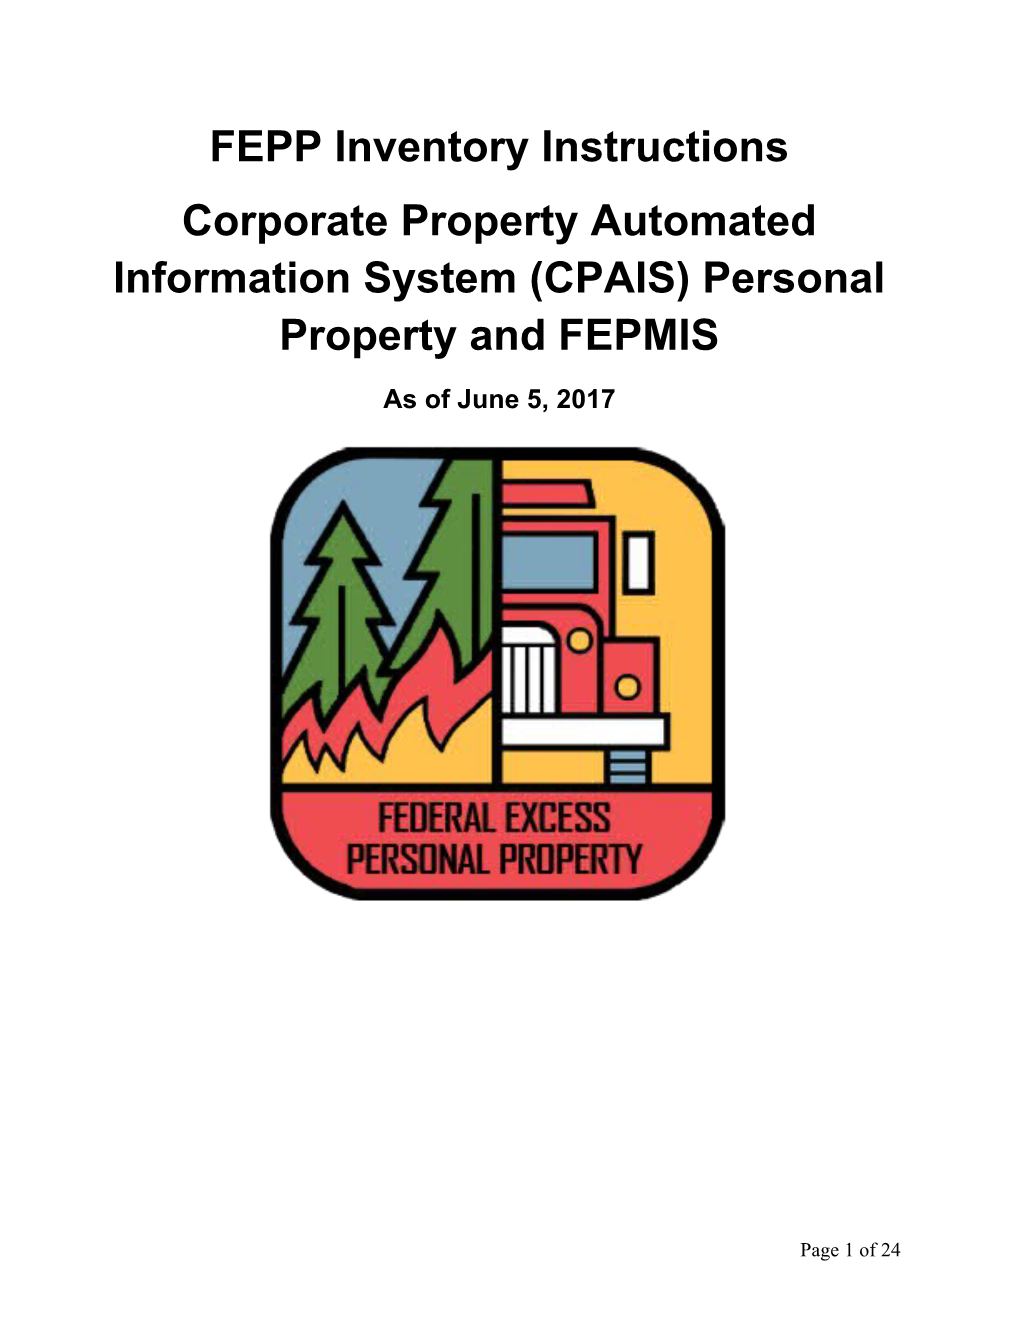 Corporate Property Automated Information System (CPAIS) Personal Property and FEPMIS